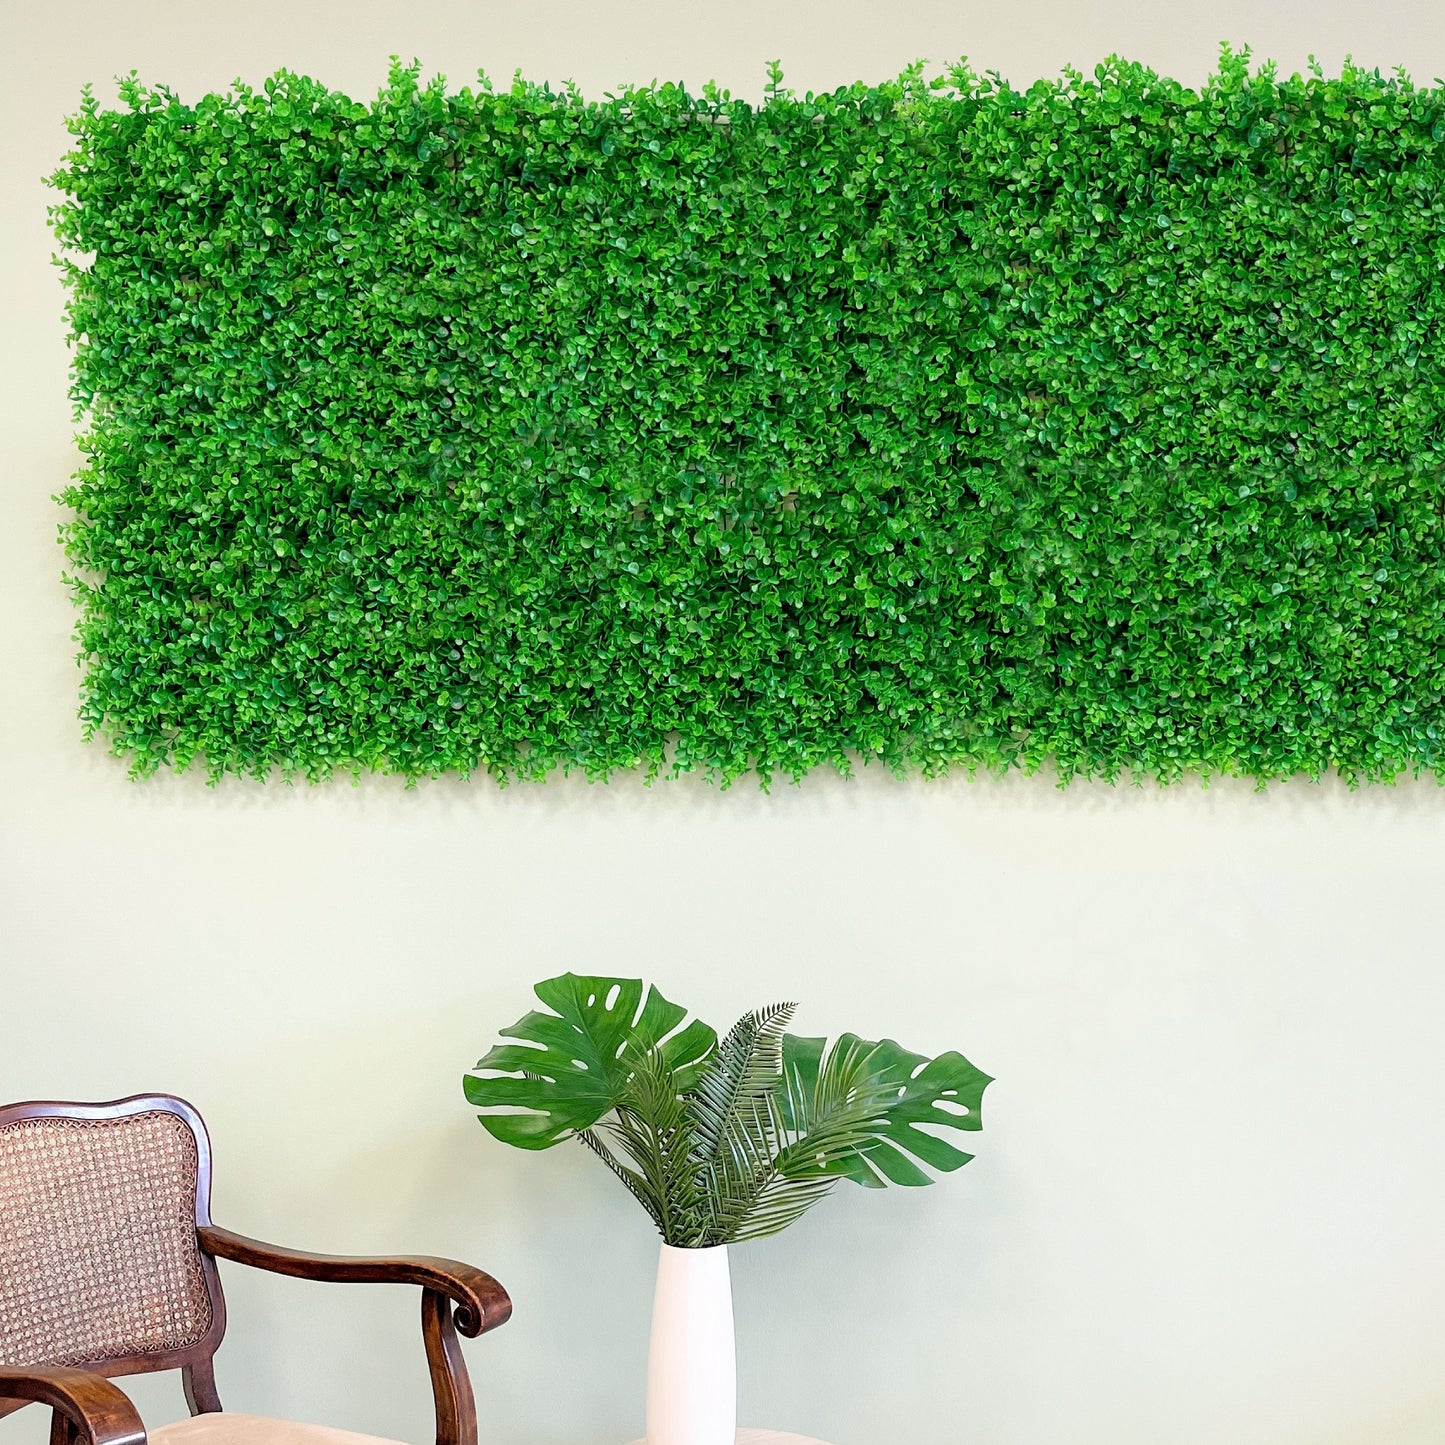 Plant panel "GRASGUM" made of Realtouch artificial plants